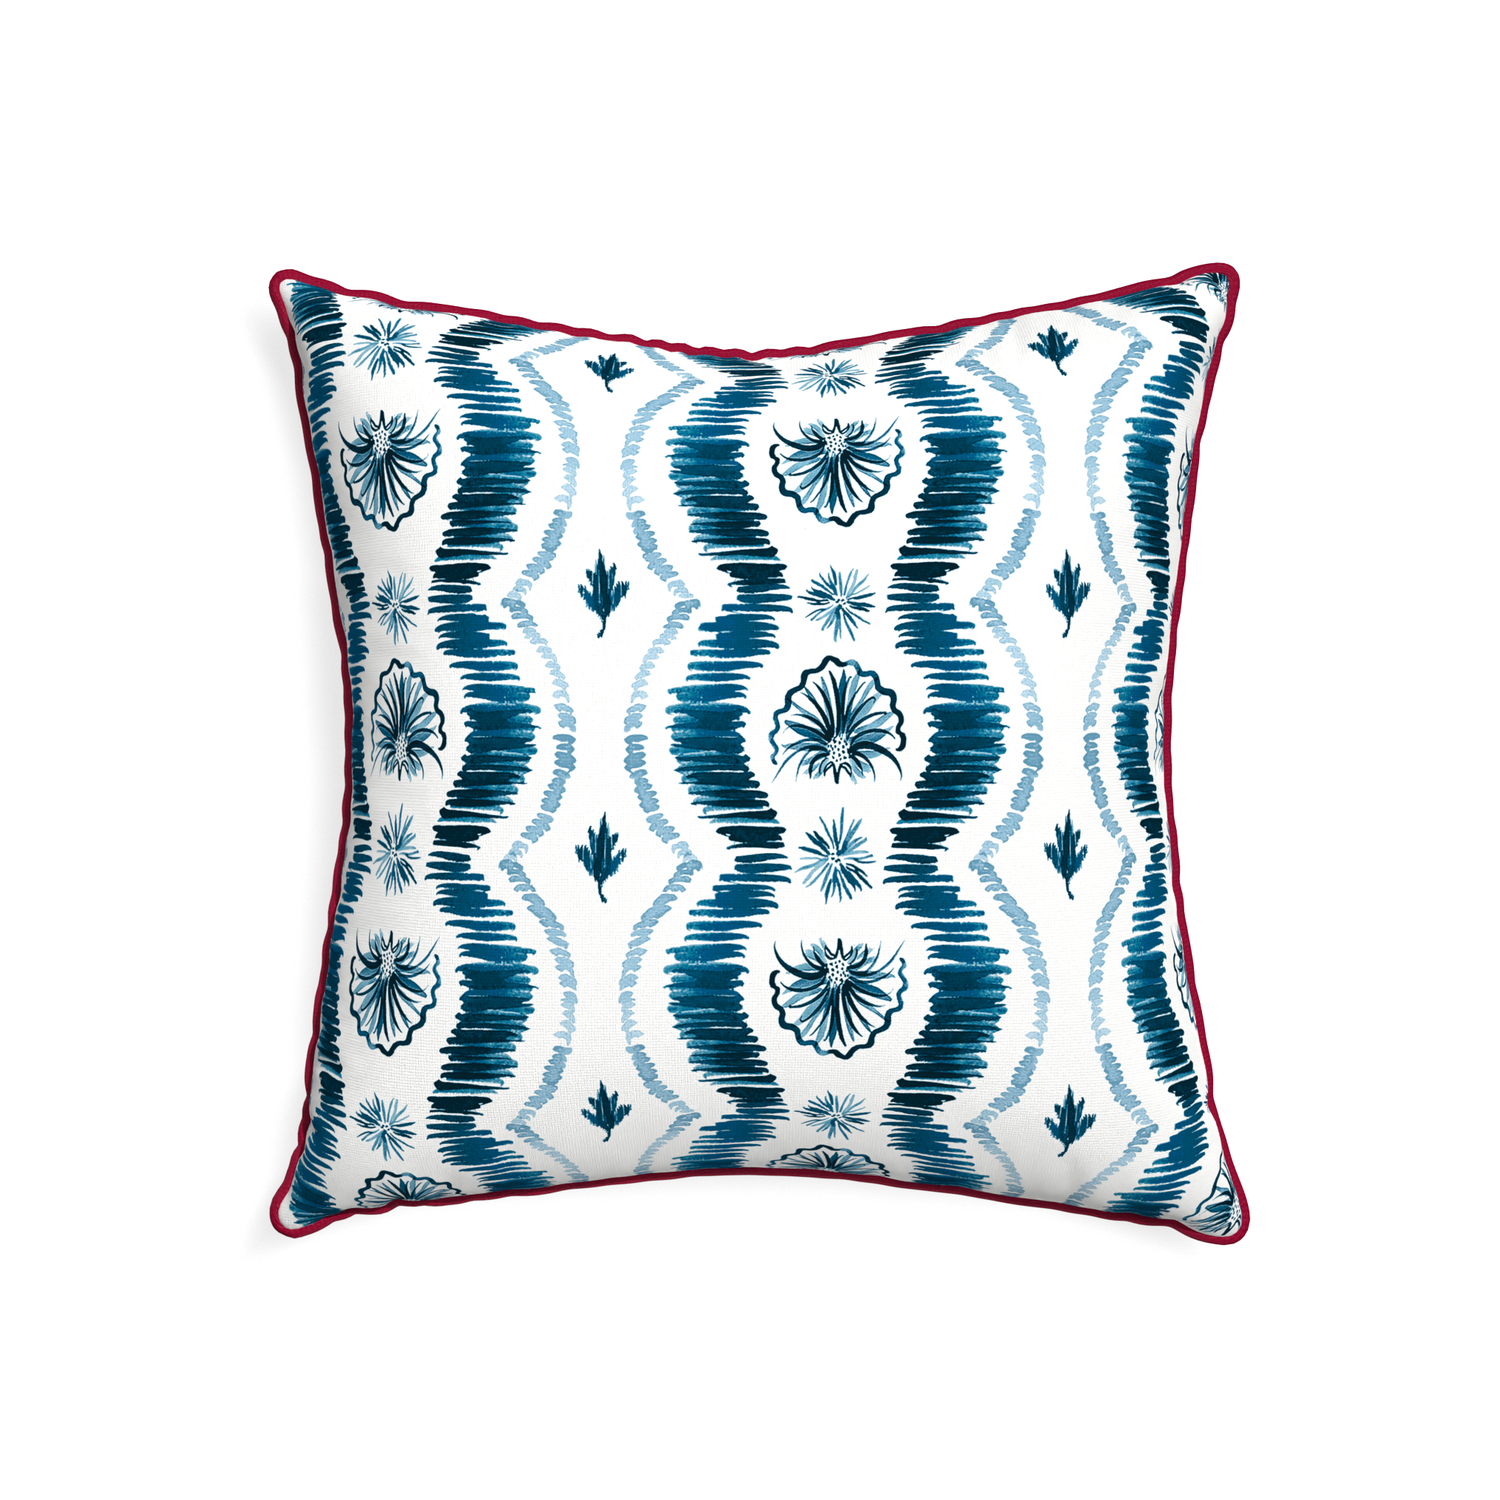 22-square alice custom blue ikatpillow with raspberry piping on white background